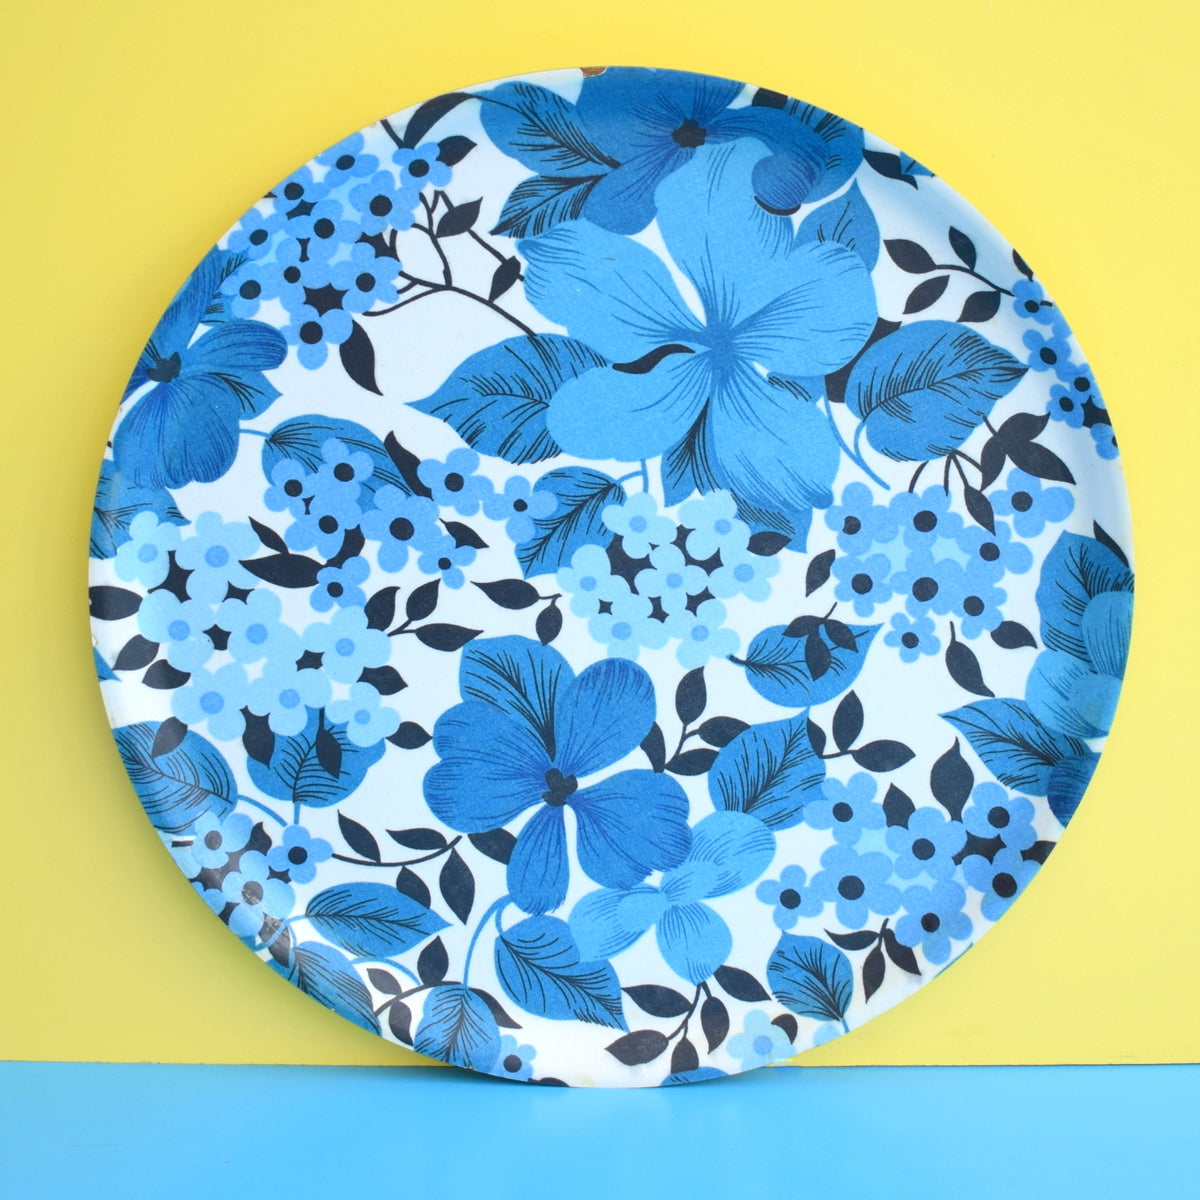 Vintage 1960s Flower Power Round Mallod Tray & Matching Chopping Board - Blue